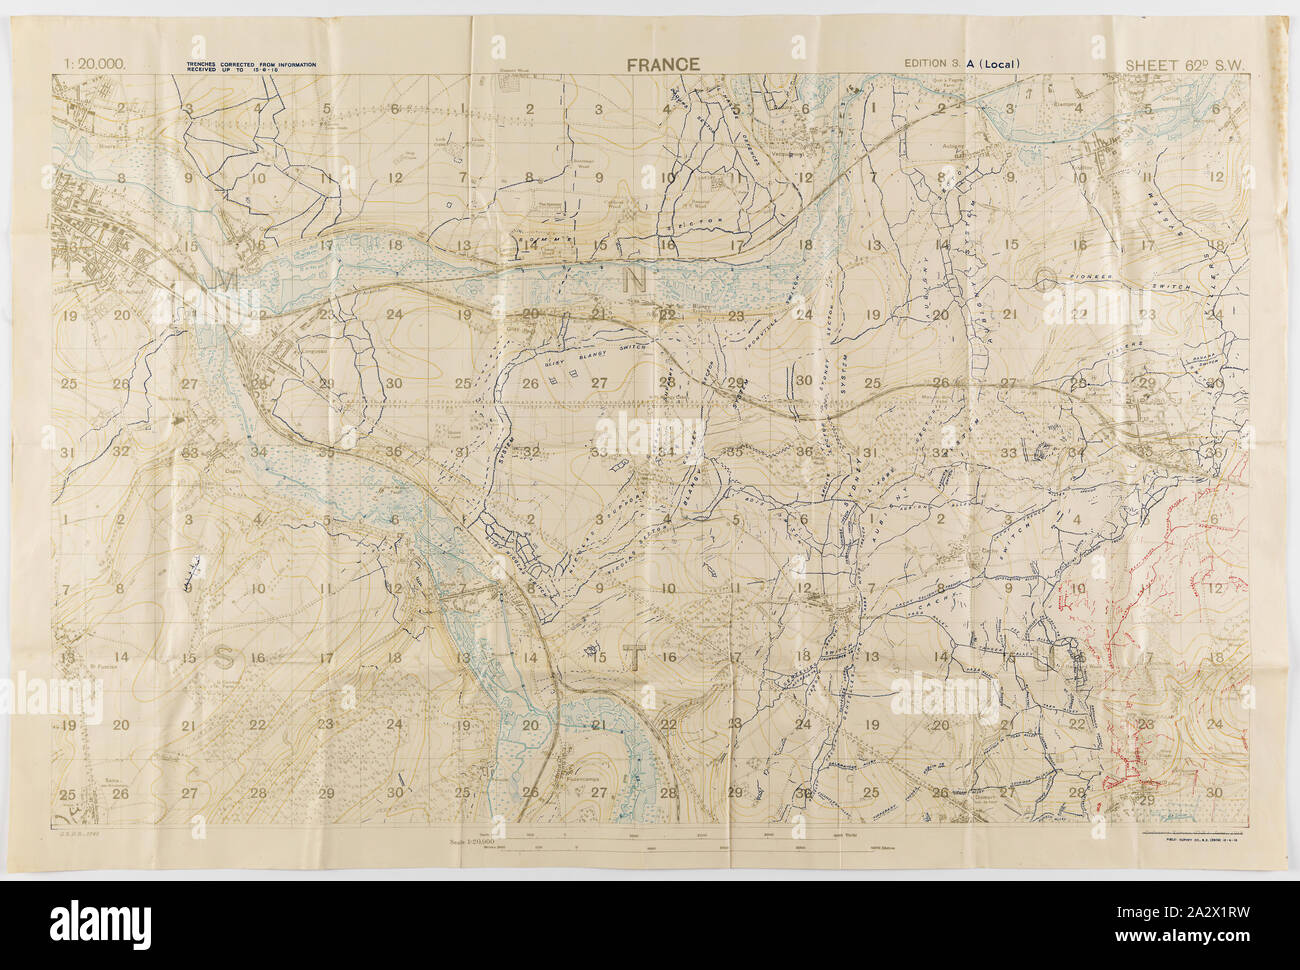 Map - Military, Trench, France, Sheet 62D SW, Scale 1:20,000, Edition 3A, World War I, 18 Jun 1918, One of two copies of a military trench map, France, sheet 62 D. S. W., edition 3.A., (local) scale 1:20,000. Trenches corrected from information received up to 15 June 1918. Field Survey Co., R. E. (3808), dated 18 June 1918. The map depicts the Somme River area to the east and south-east of Amiens, including Villers-Bretonneux. Used by Capt. M. Lewis during World War I. Captain Morris Lewis Stock Photo